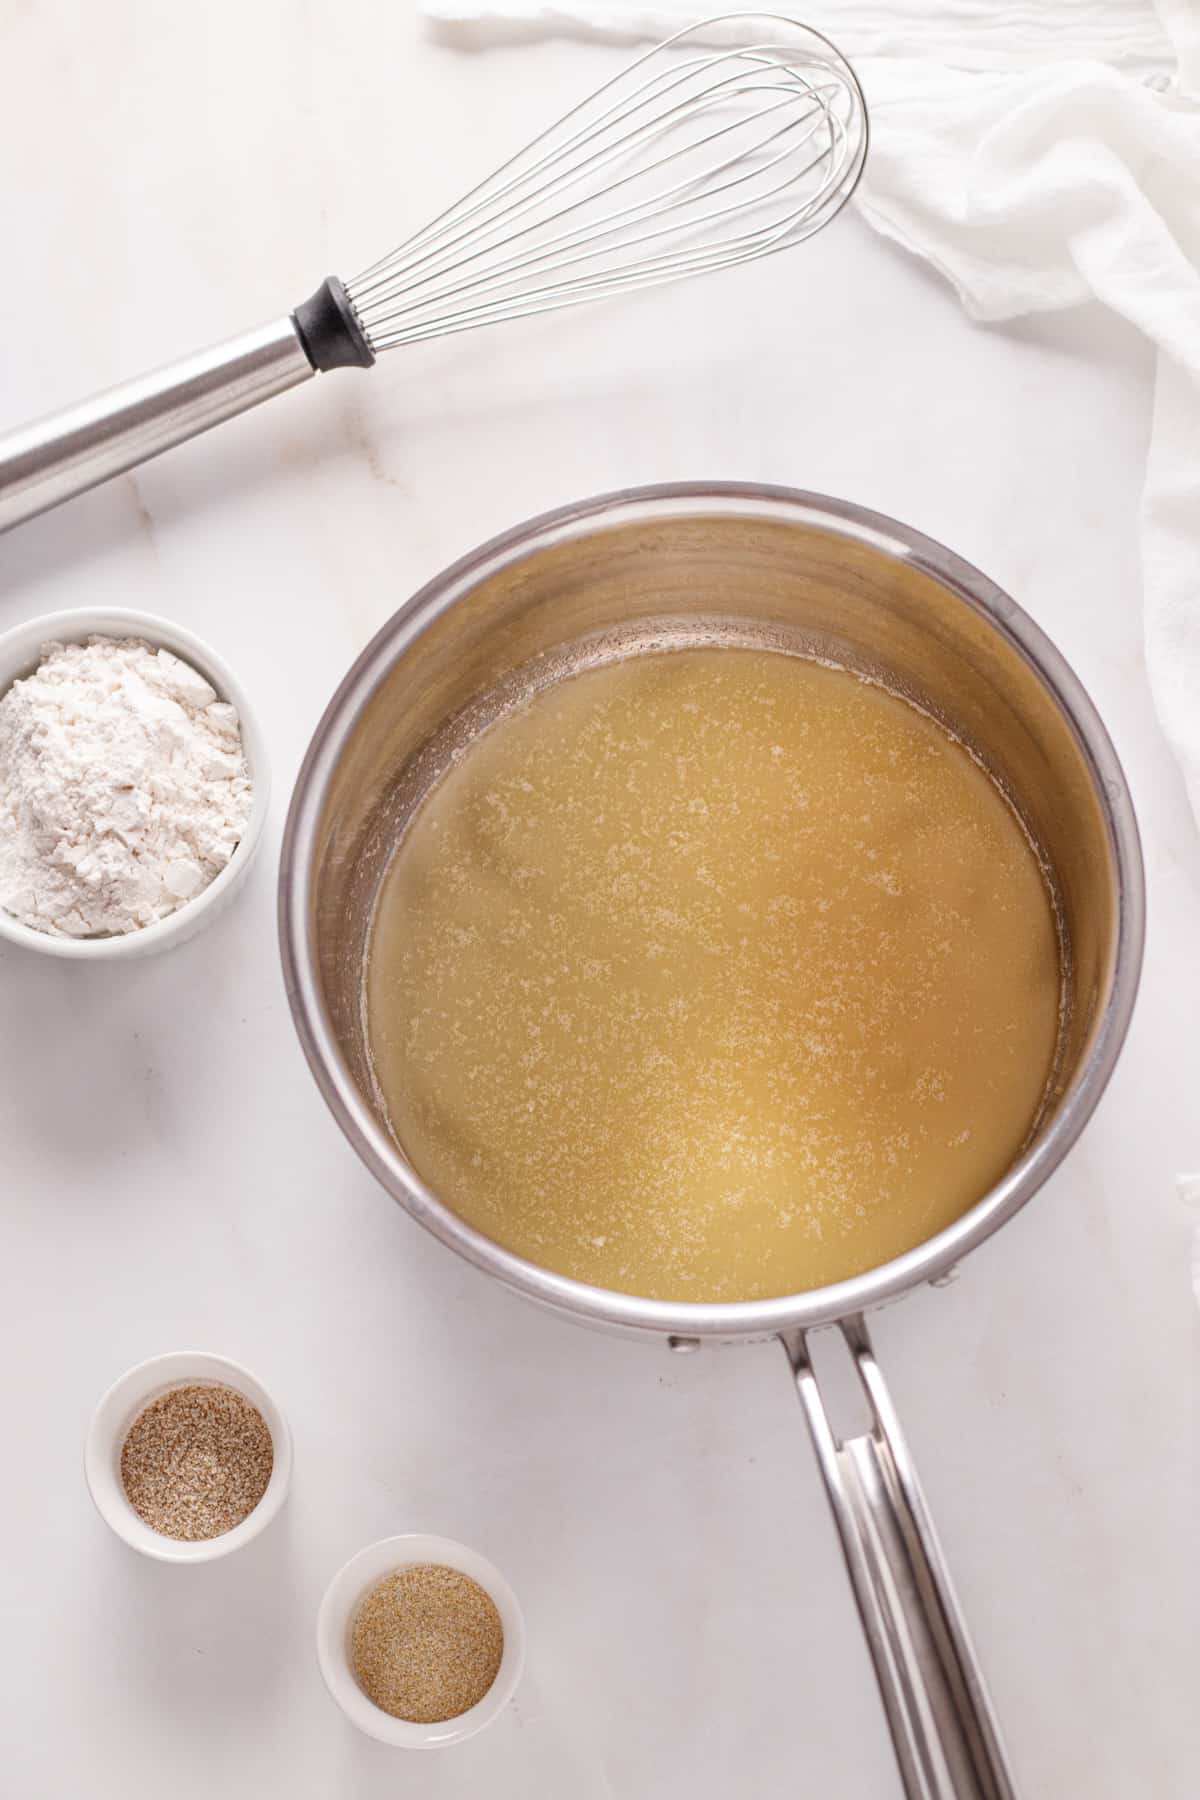 Melted butter in a stainless steel pot.